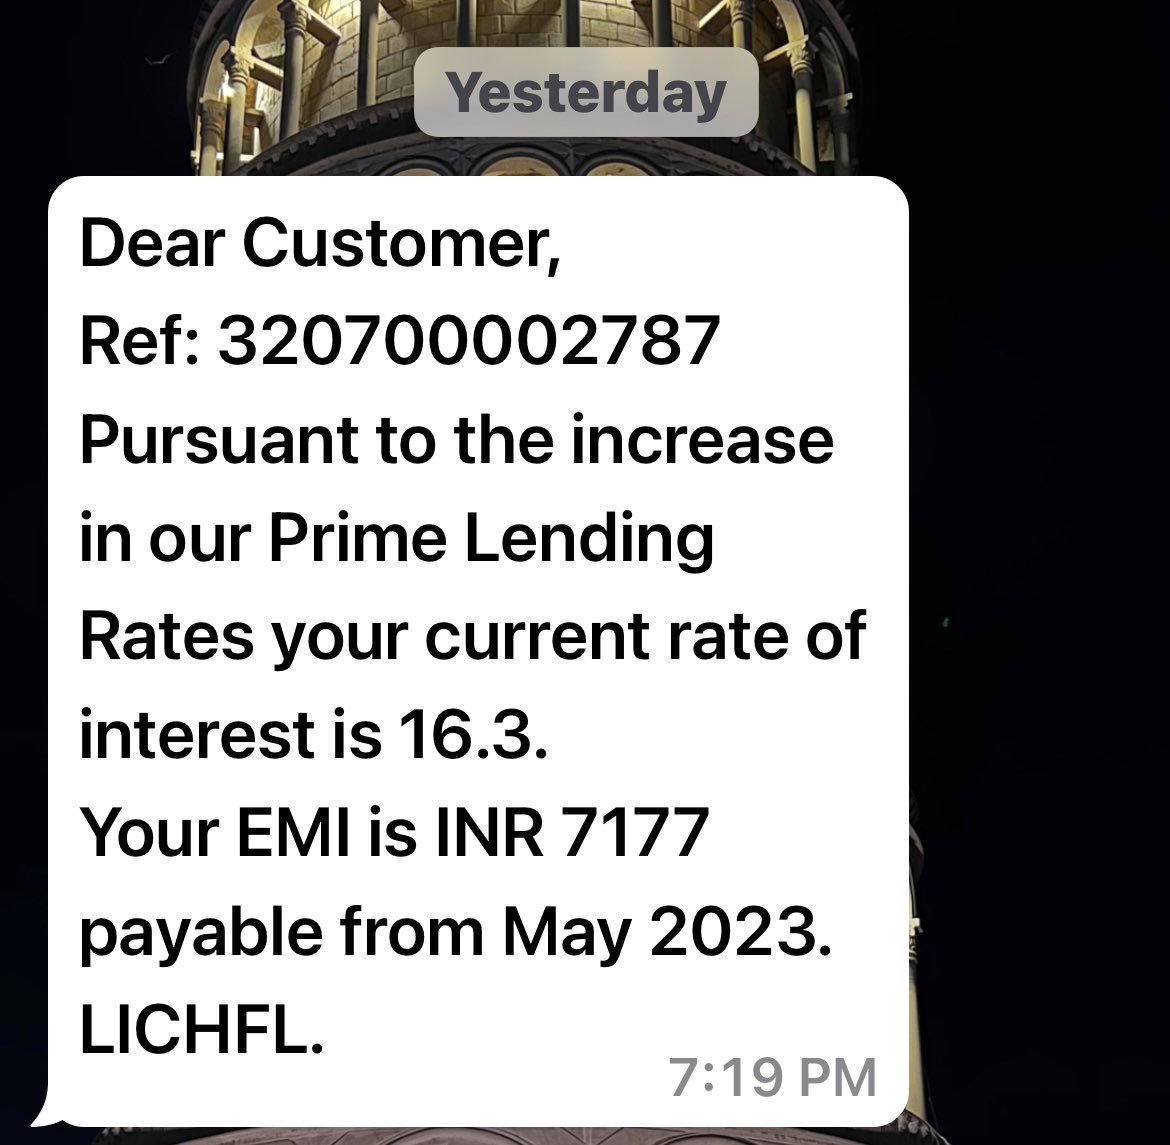 @lichfl_brh I want to know about my loan completion date 
Loan no 320700002787
What is the meaning of this msg